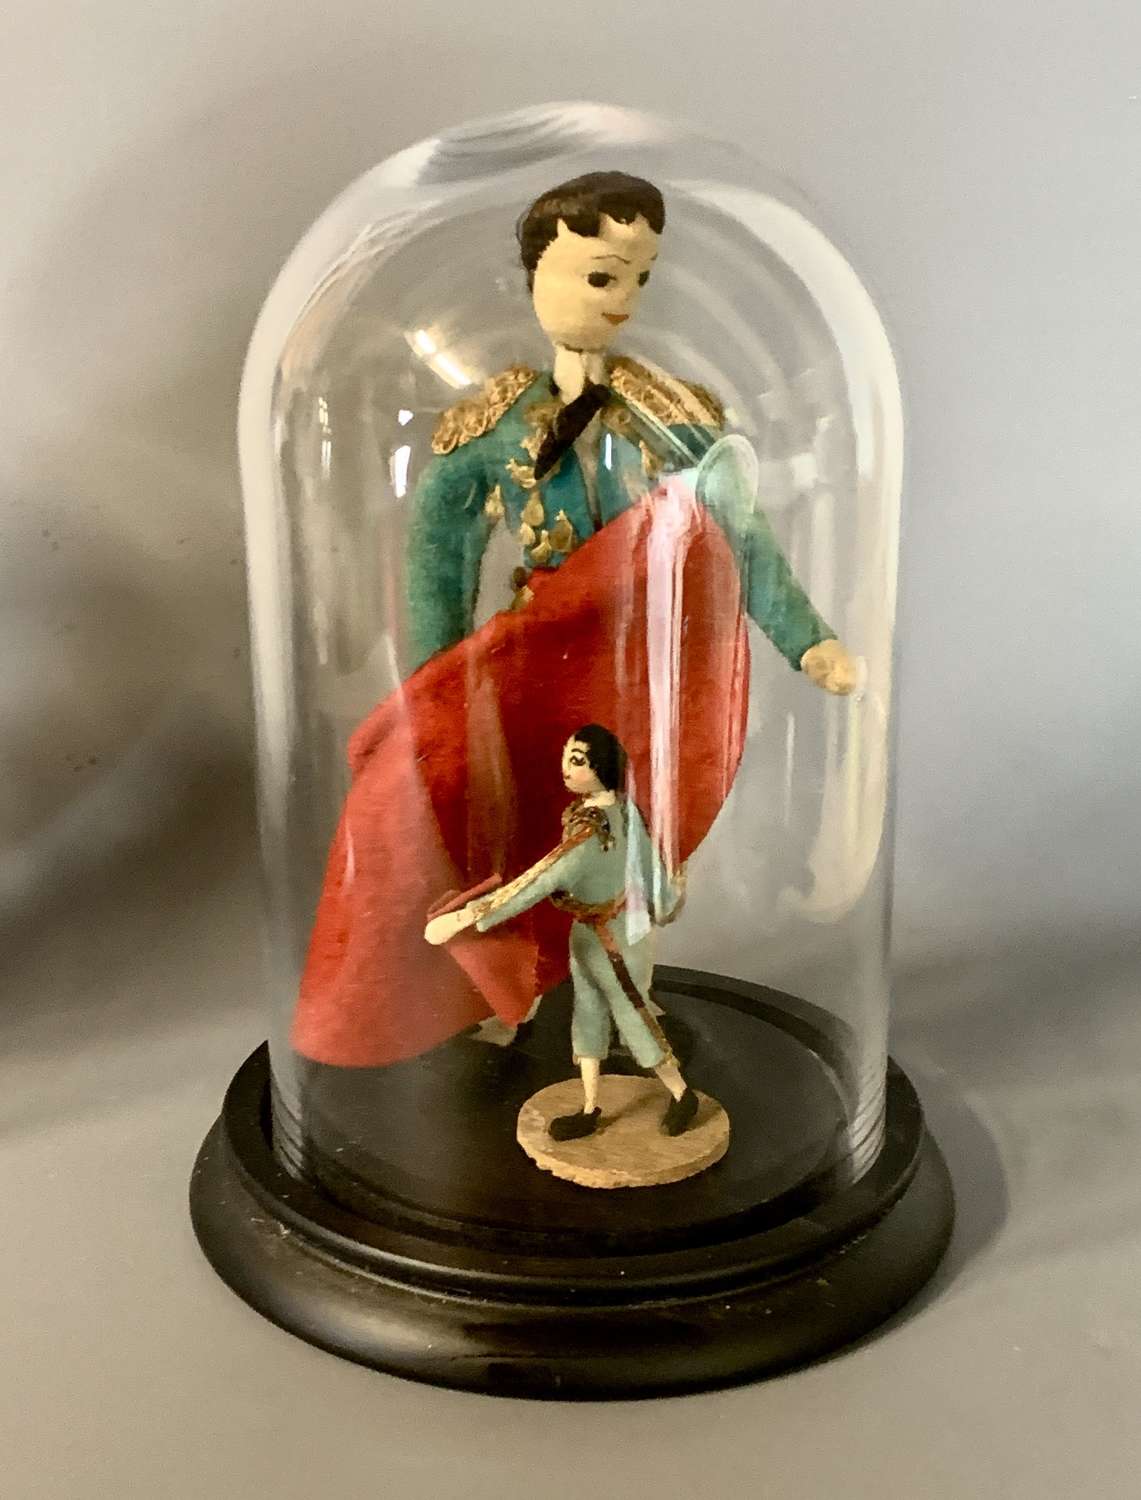 Vintage Spanish Bullfighter Costume Doll possibly by Klumpe